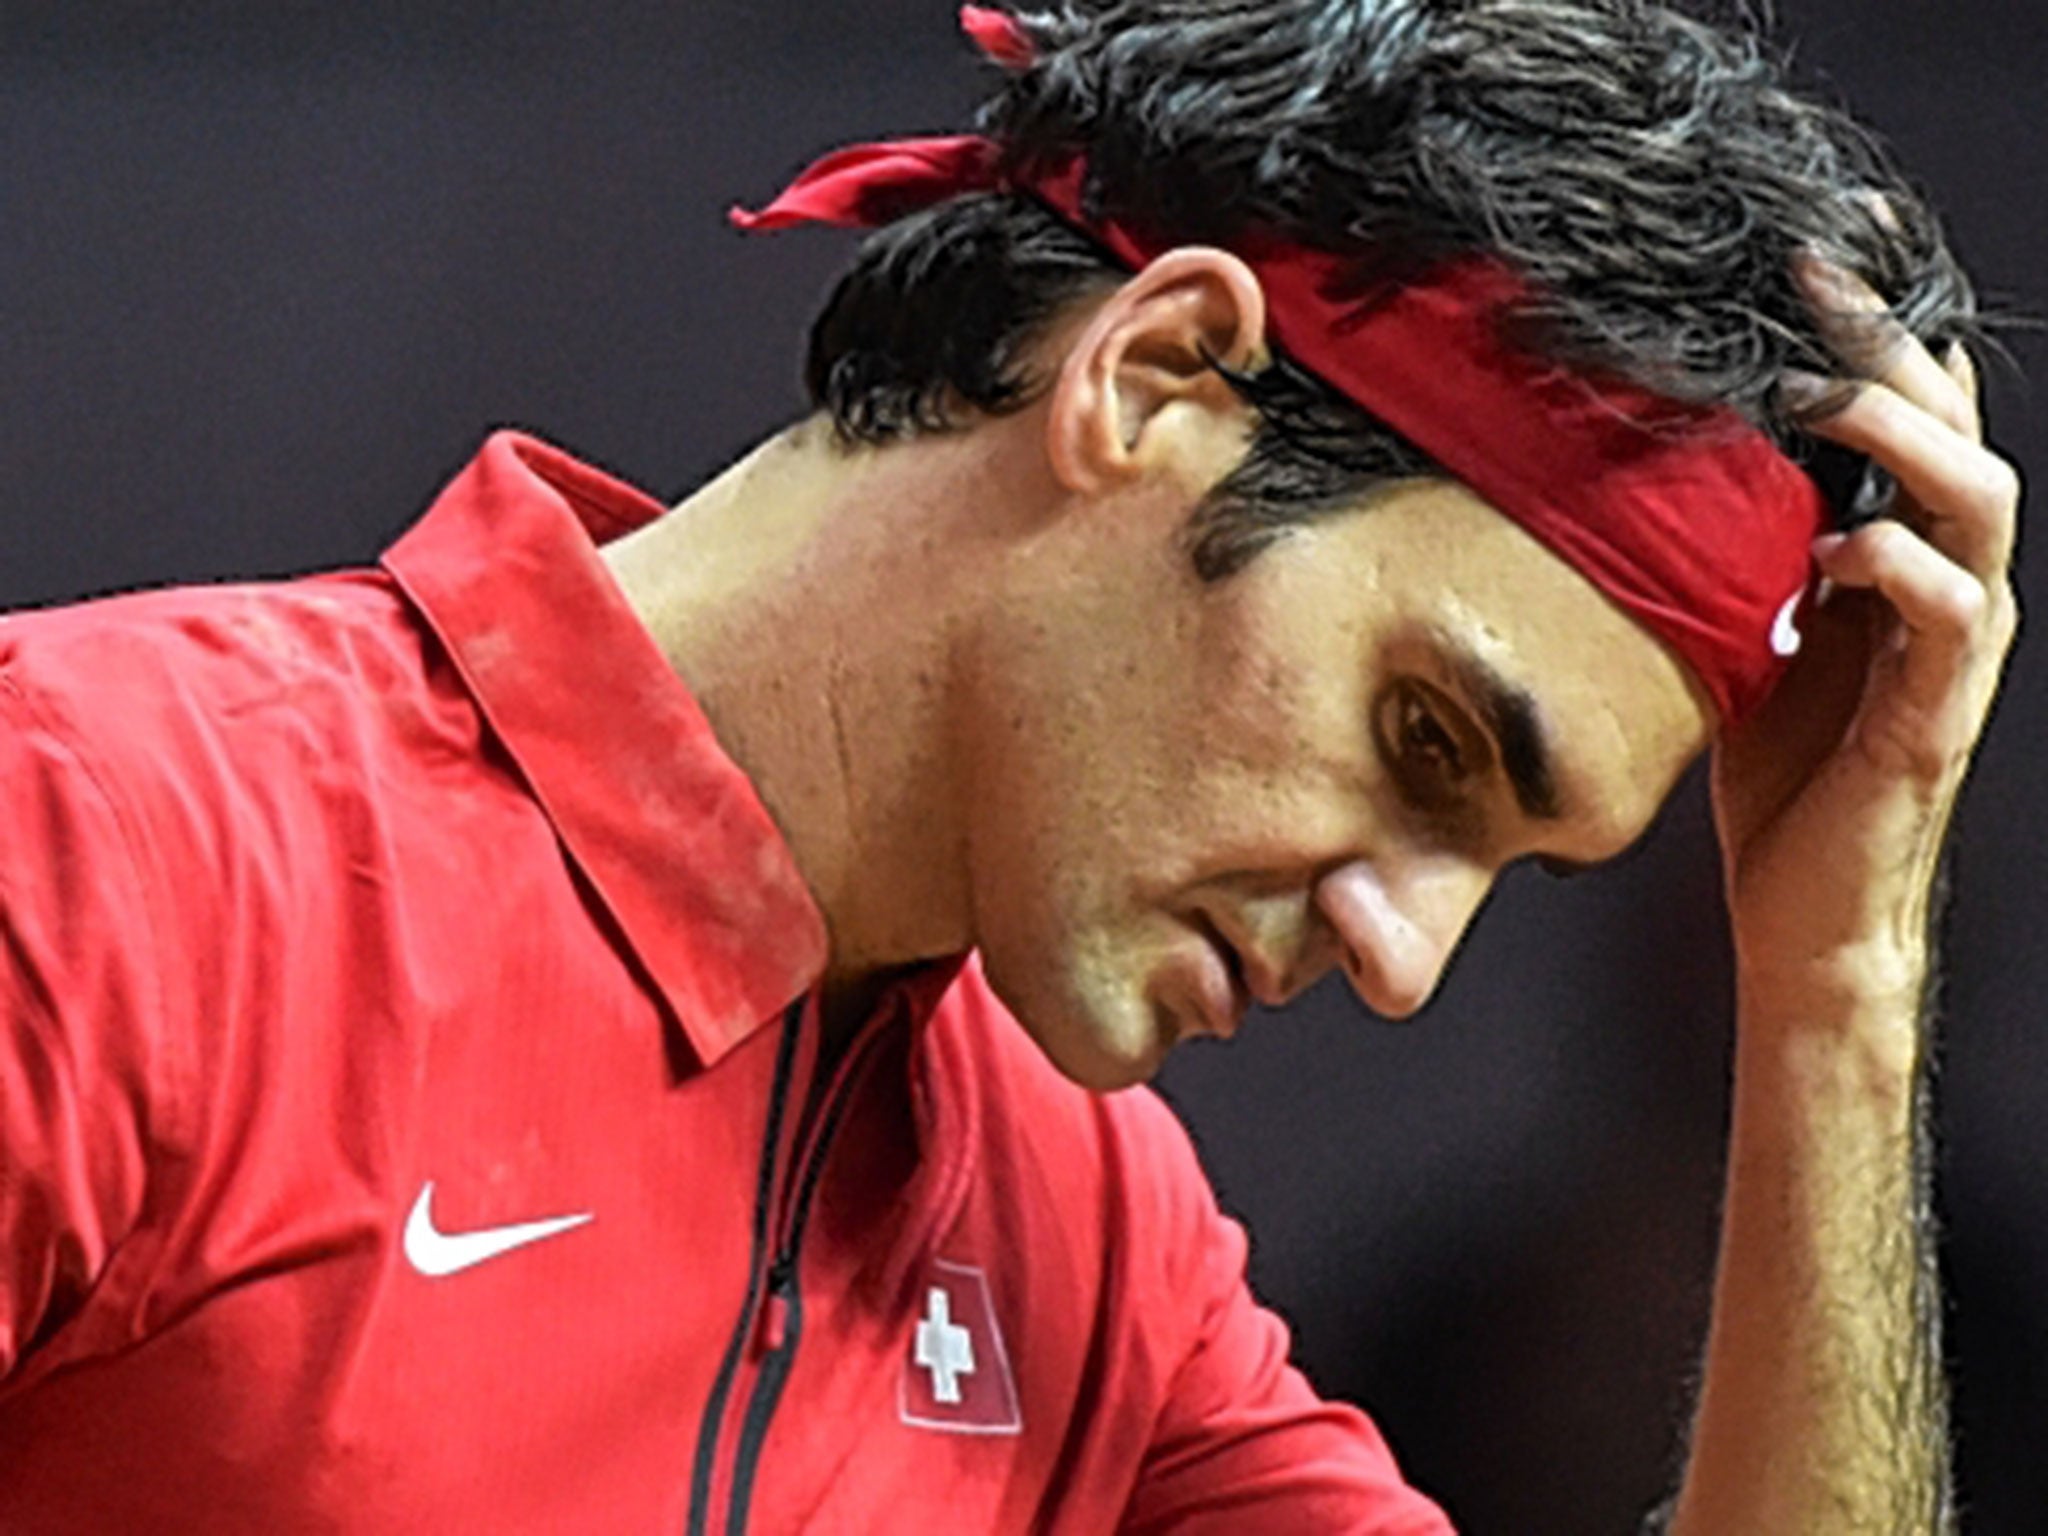 A back injury seemed to affect Roger Federer’s Davis Cup performance